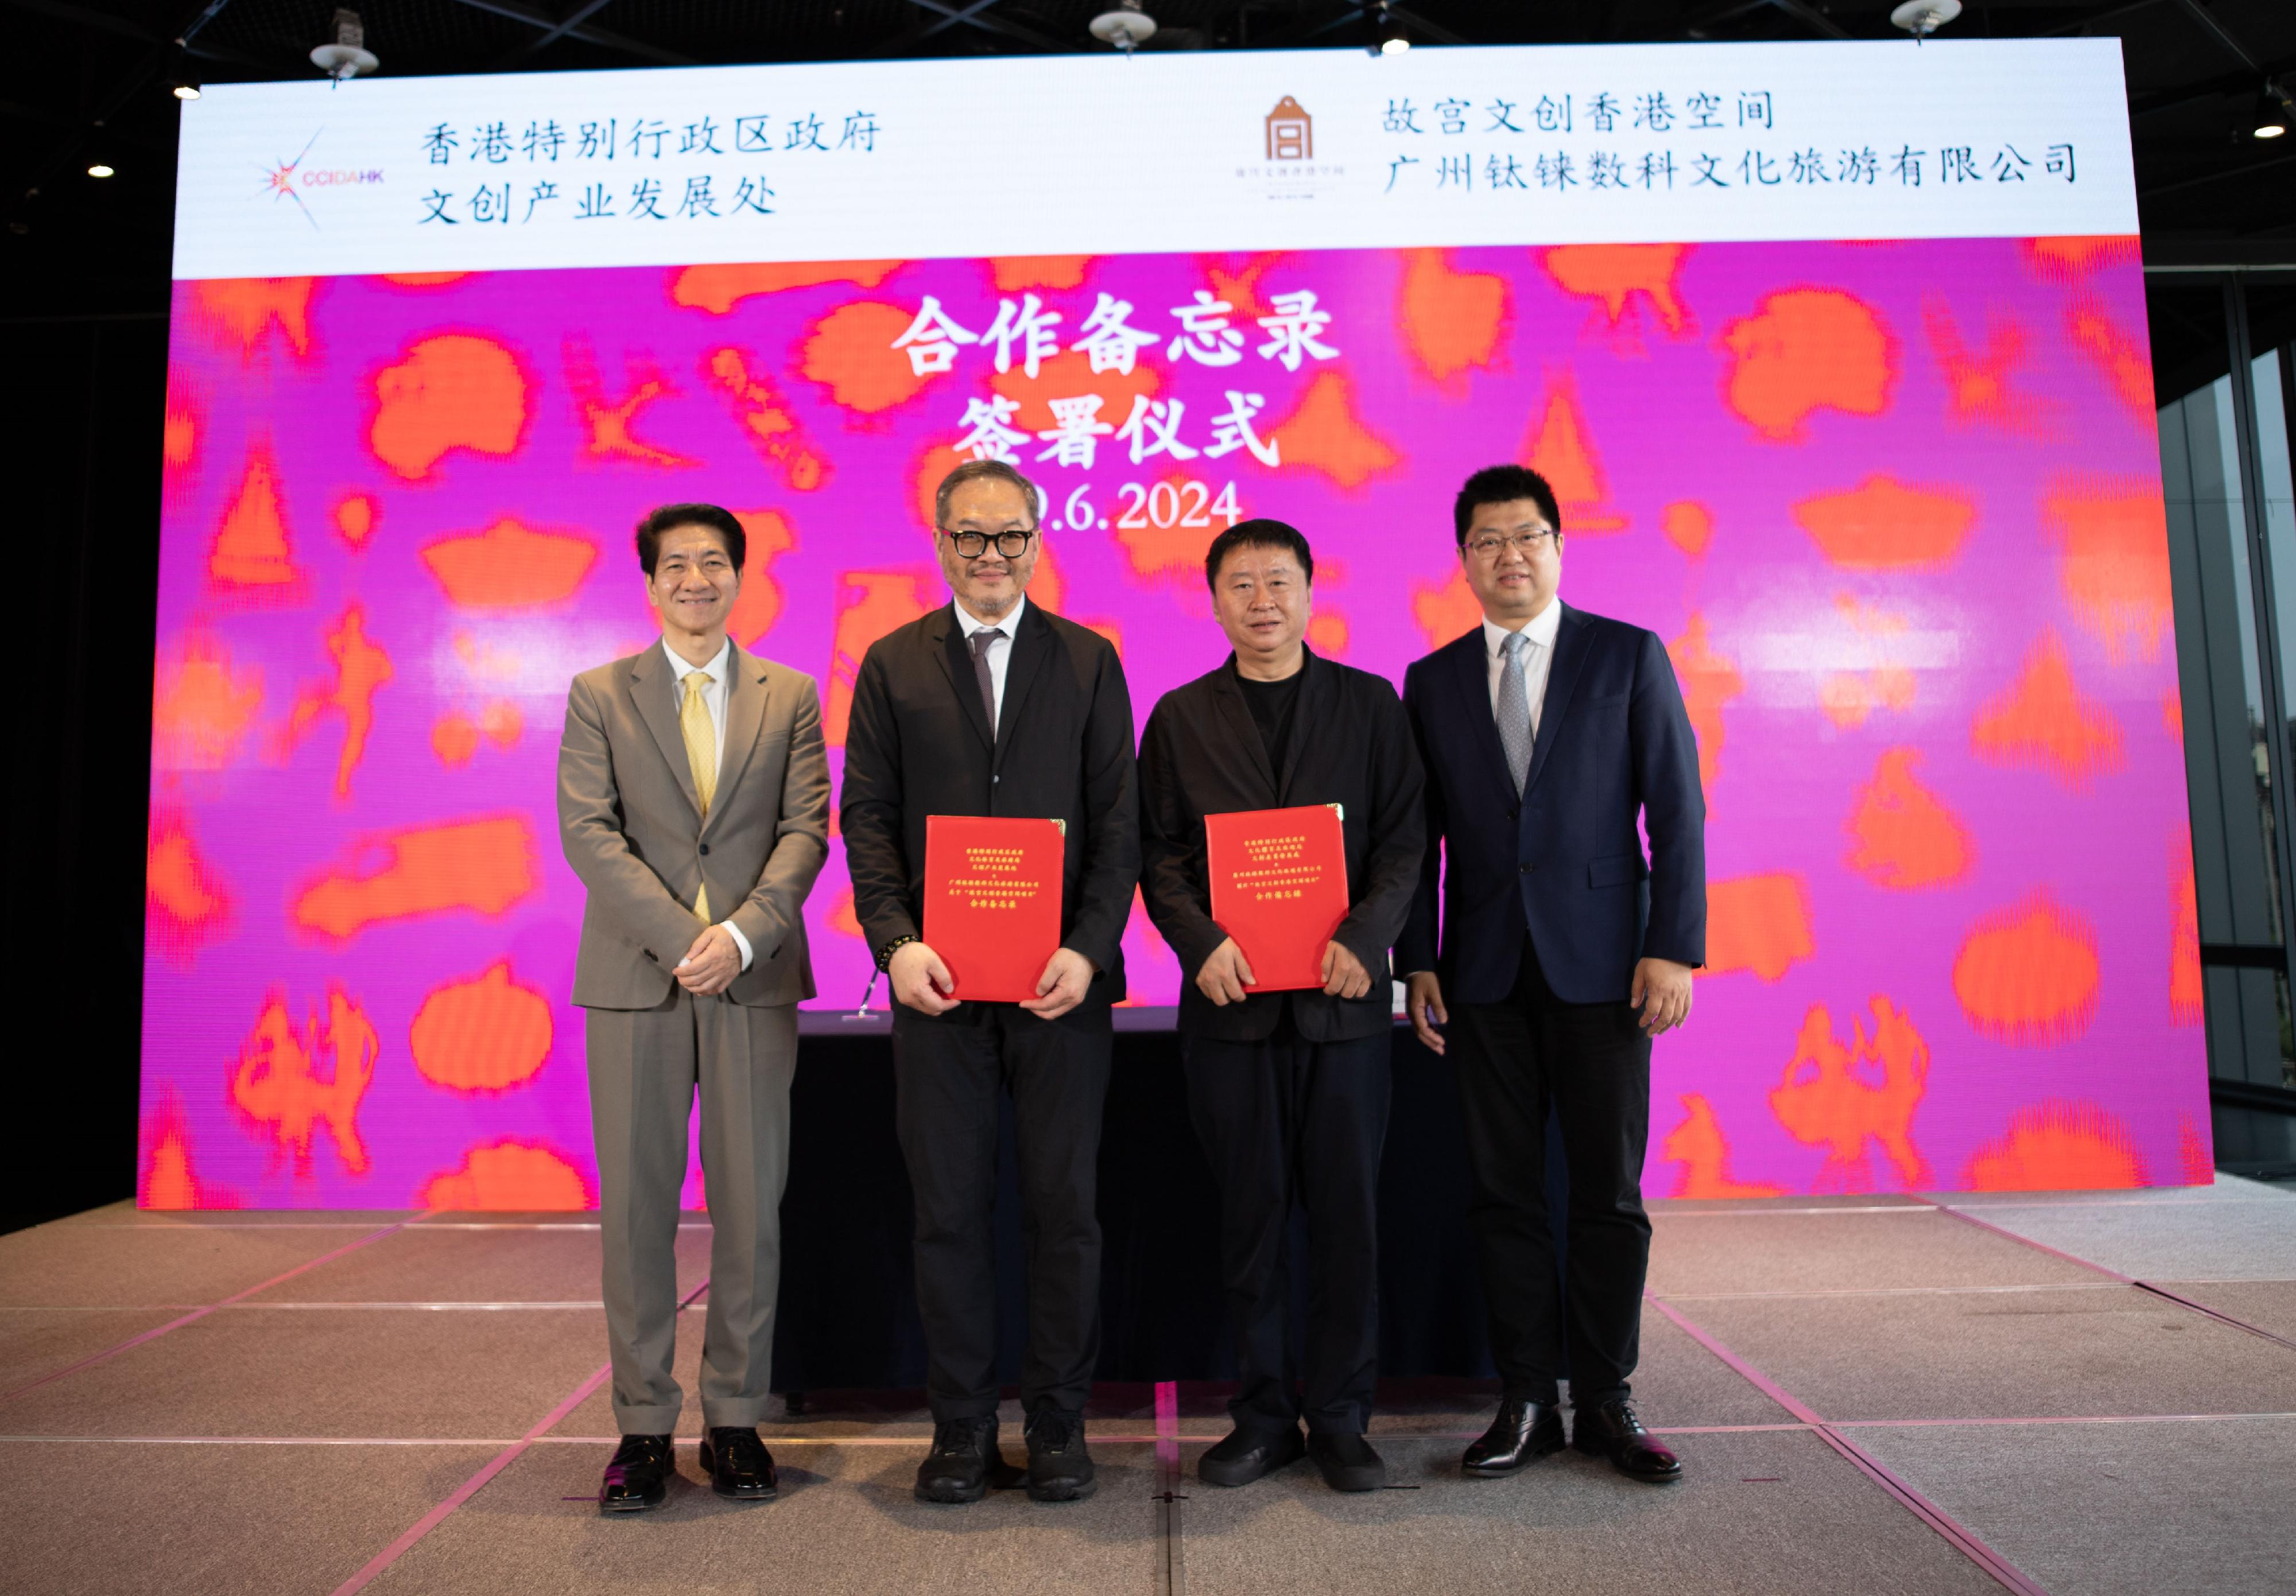 The Cultural and Creative Industries Development Agency of the Culture, Sports and Tourism Bureau signed a Memorandum of Understanding with the Guangzhou Tai Lai Digitals Cultural Tourism Co Ltd on June 19 in Beijing. Photo shows the Commissioner for Cultural and Creative Industries, Mr Victor Tsang (second left); the Chairman of Guangzhou Tai Lai Digitals Cultural Tourism Co Ltd, Mr Peng Zhihong (second right); the Executive President of Takungpao.com.hk and Head of the Palace Museum Cultural and Creative Products Hong Kong Space, Mr Wang Wentao (first right); and the Director of the Office of the Government of the Hong Kong Special Administrative Region in Beijing, Mr Rex Chang (first left).